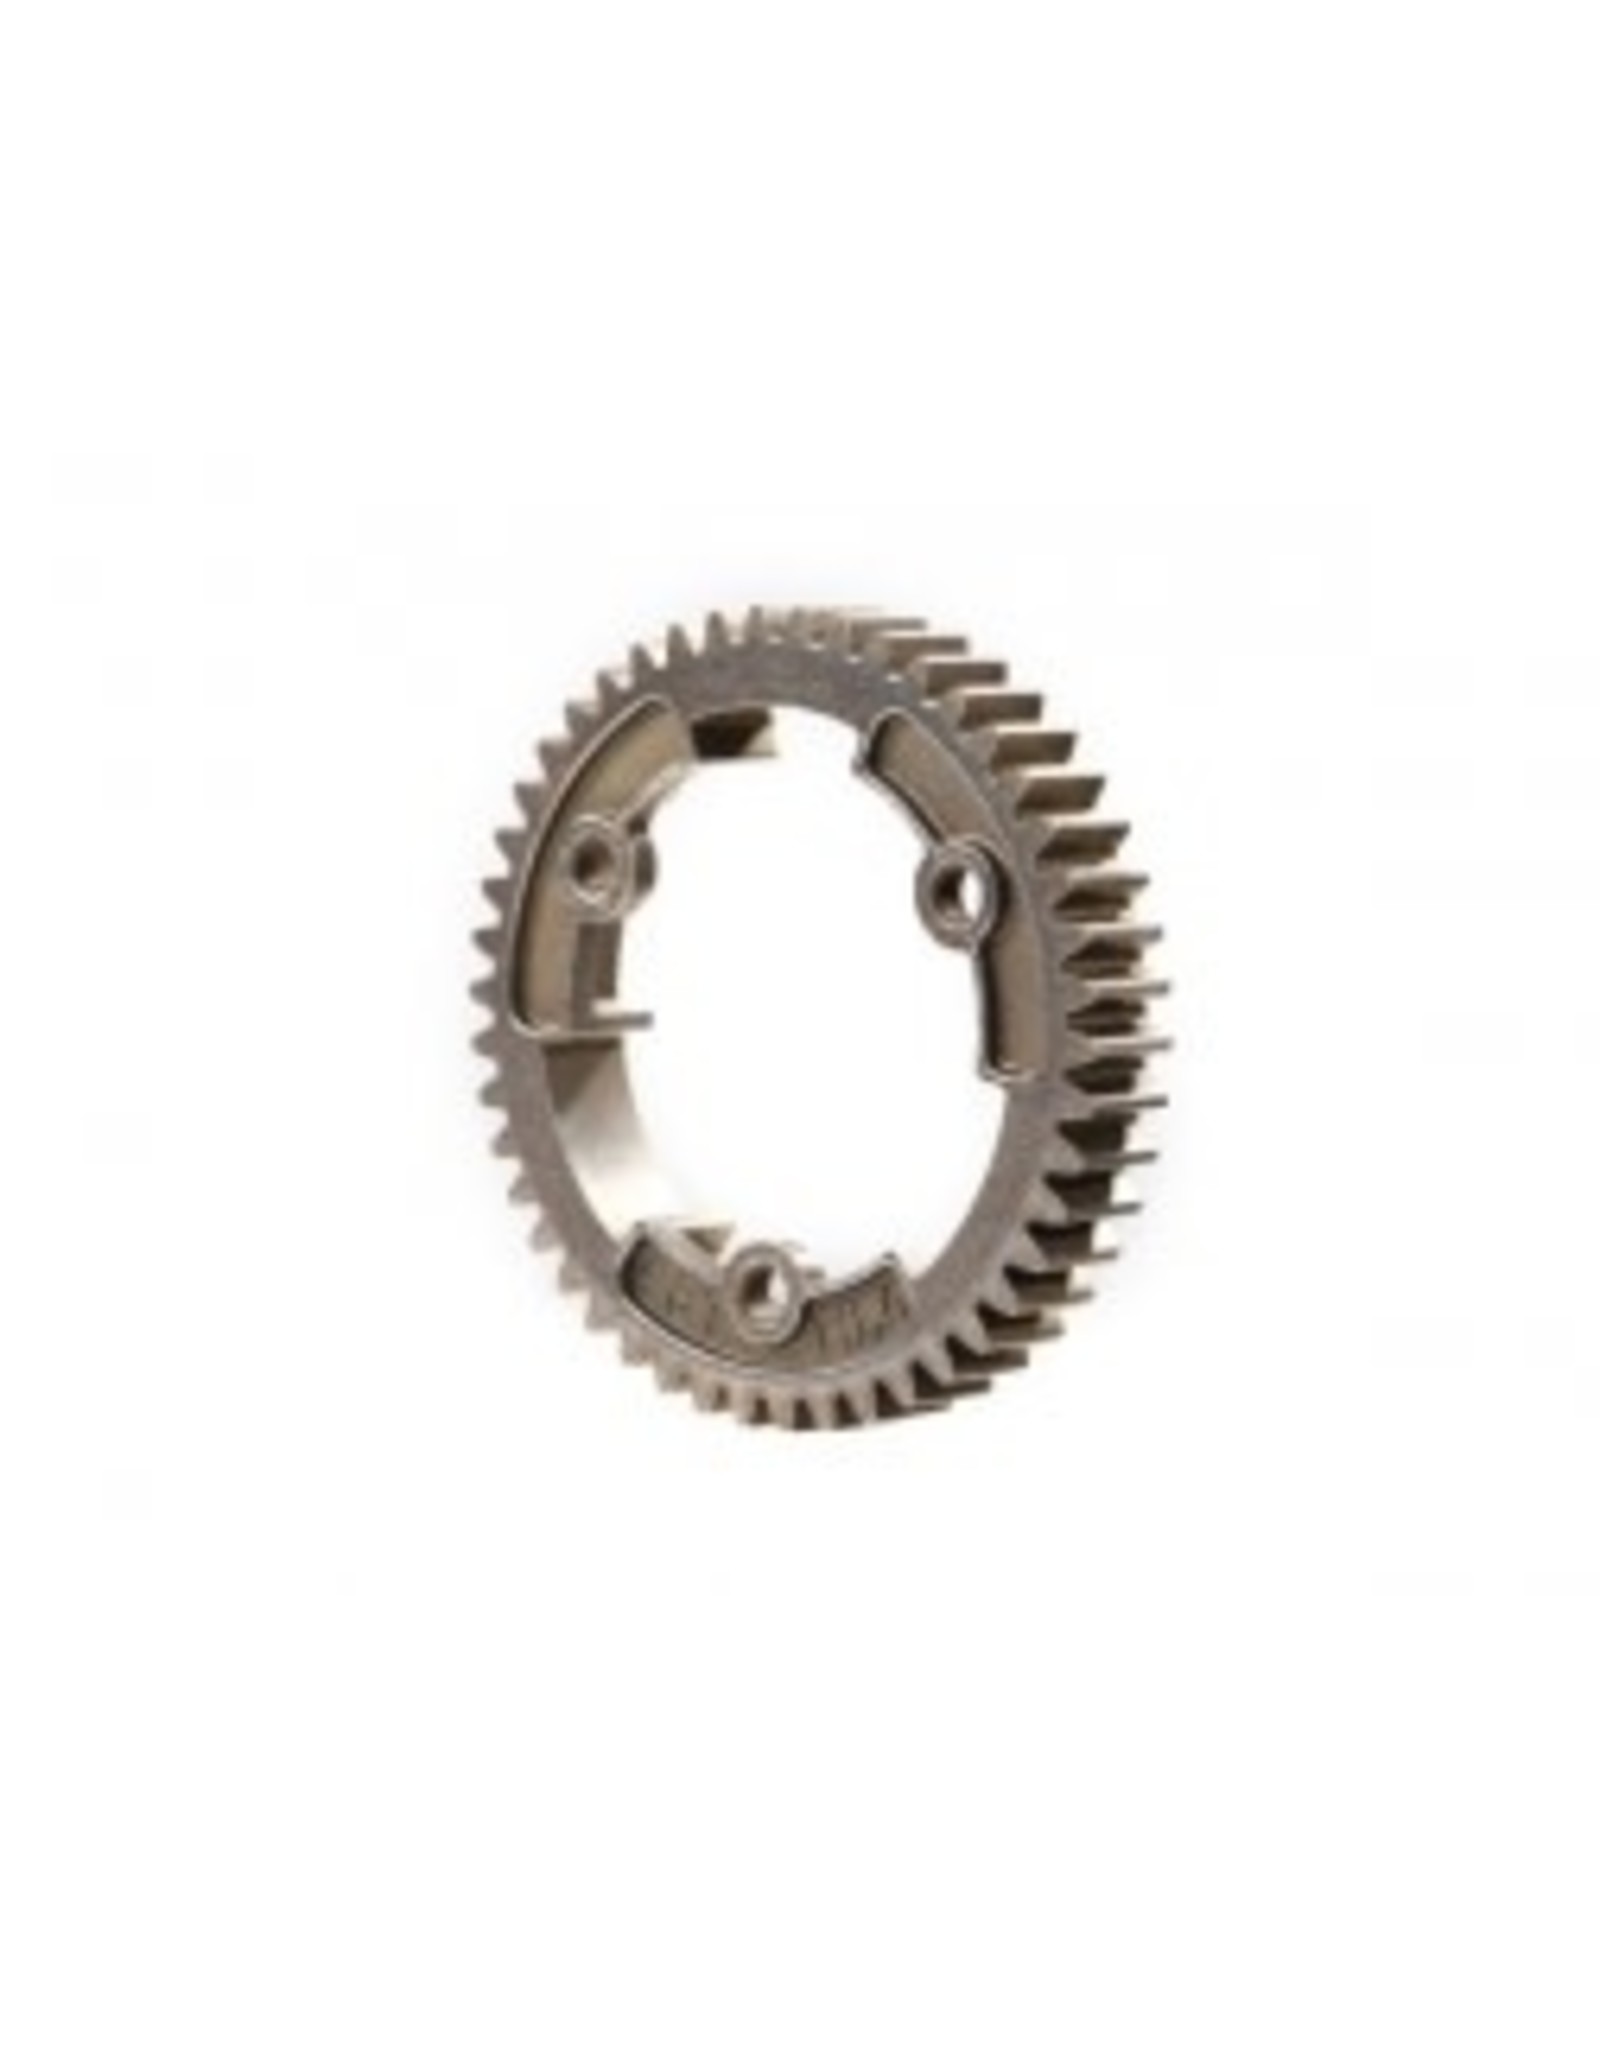 Traxxas [Spur gear, 46-tooth, steel (wide-face, 1.0 metric pitch)] Spur gear, 46-tooth, steel (wide-face, 1.0 metric pitch)